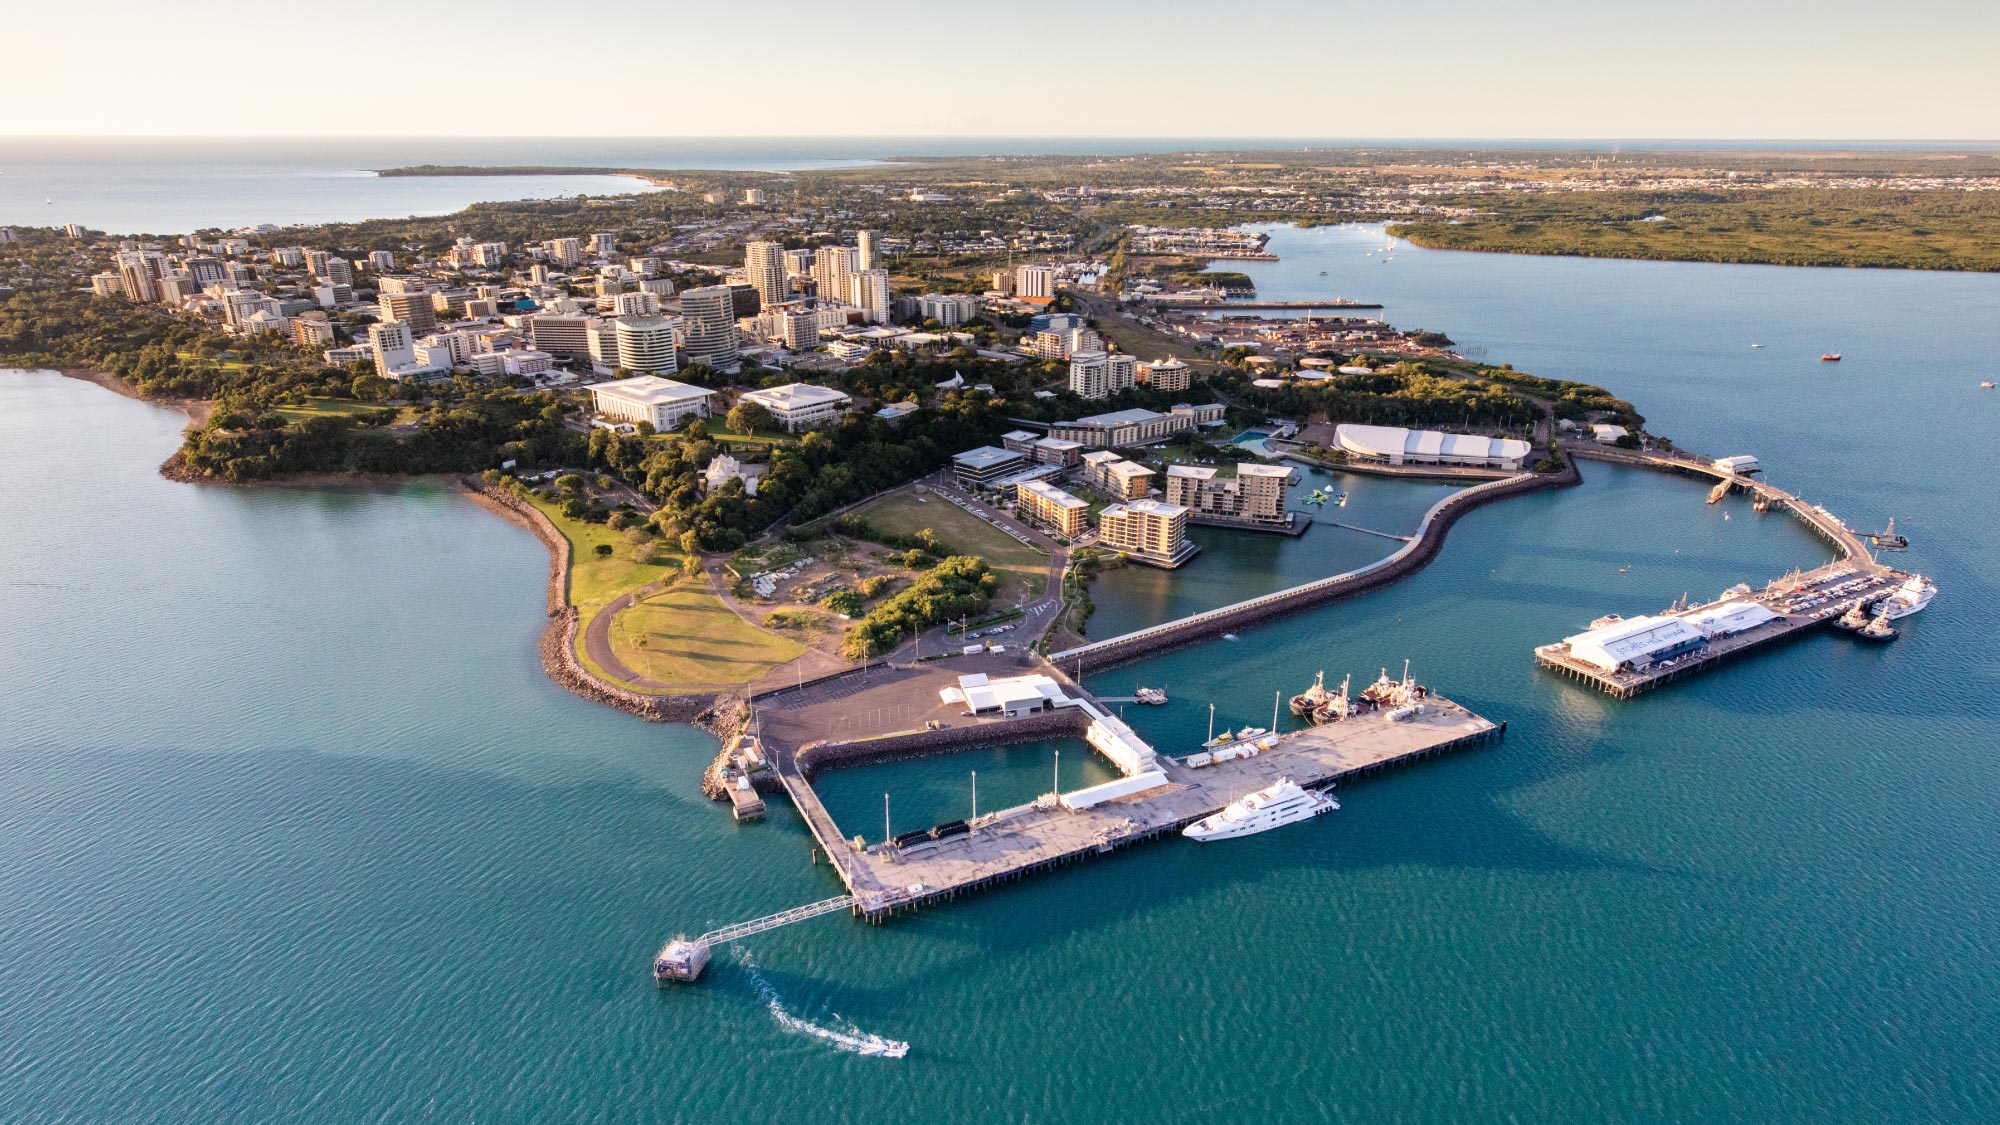 Discover Darwin, Australia – a journey highlight for pilots exploring 21 countries. Experience its tropical landscapes, diverse cuisine, and cultural richness. Perfect for those flying and owning their own airplanes